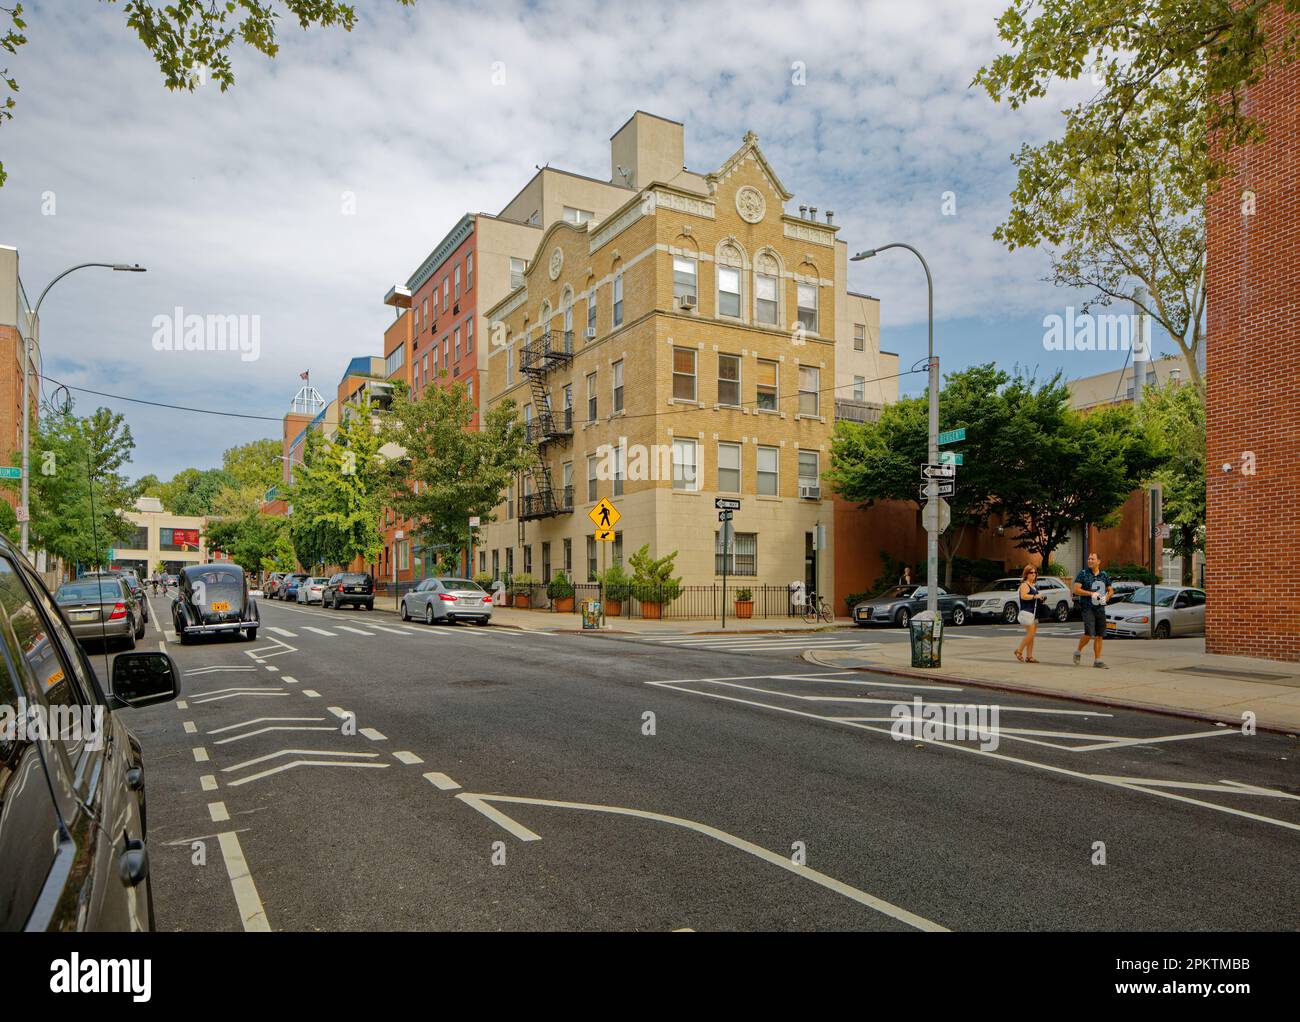 134 Boerum Place, in Boerum Hill, Brooklyn, is a low-rise brick apartment building at the corner of Boerum Place and Bergen Street. Stock Photo